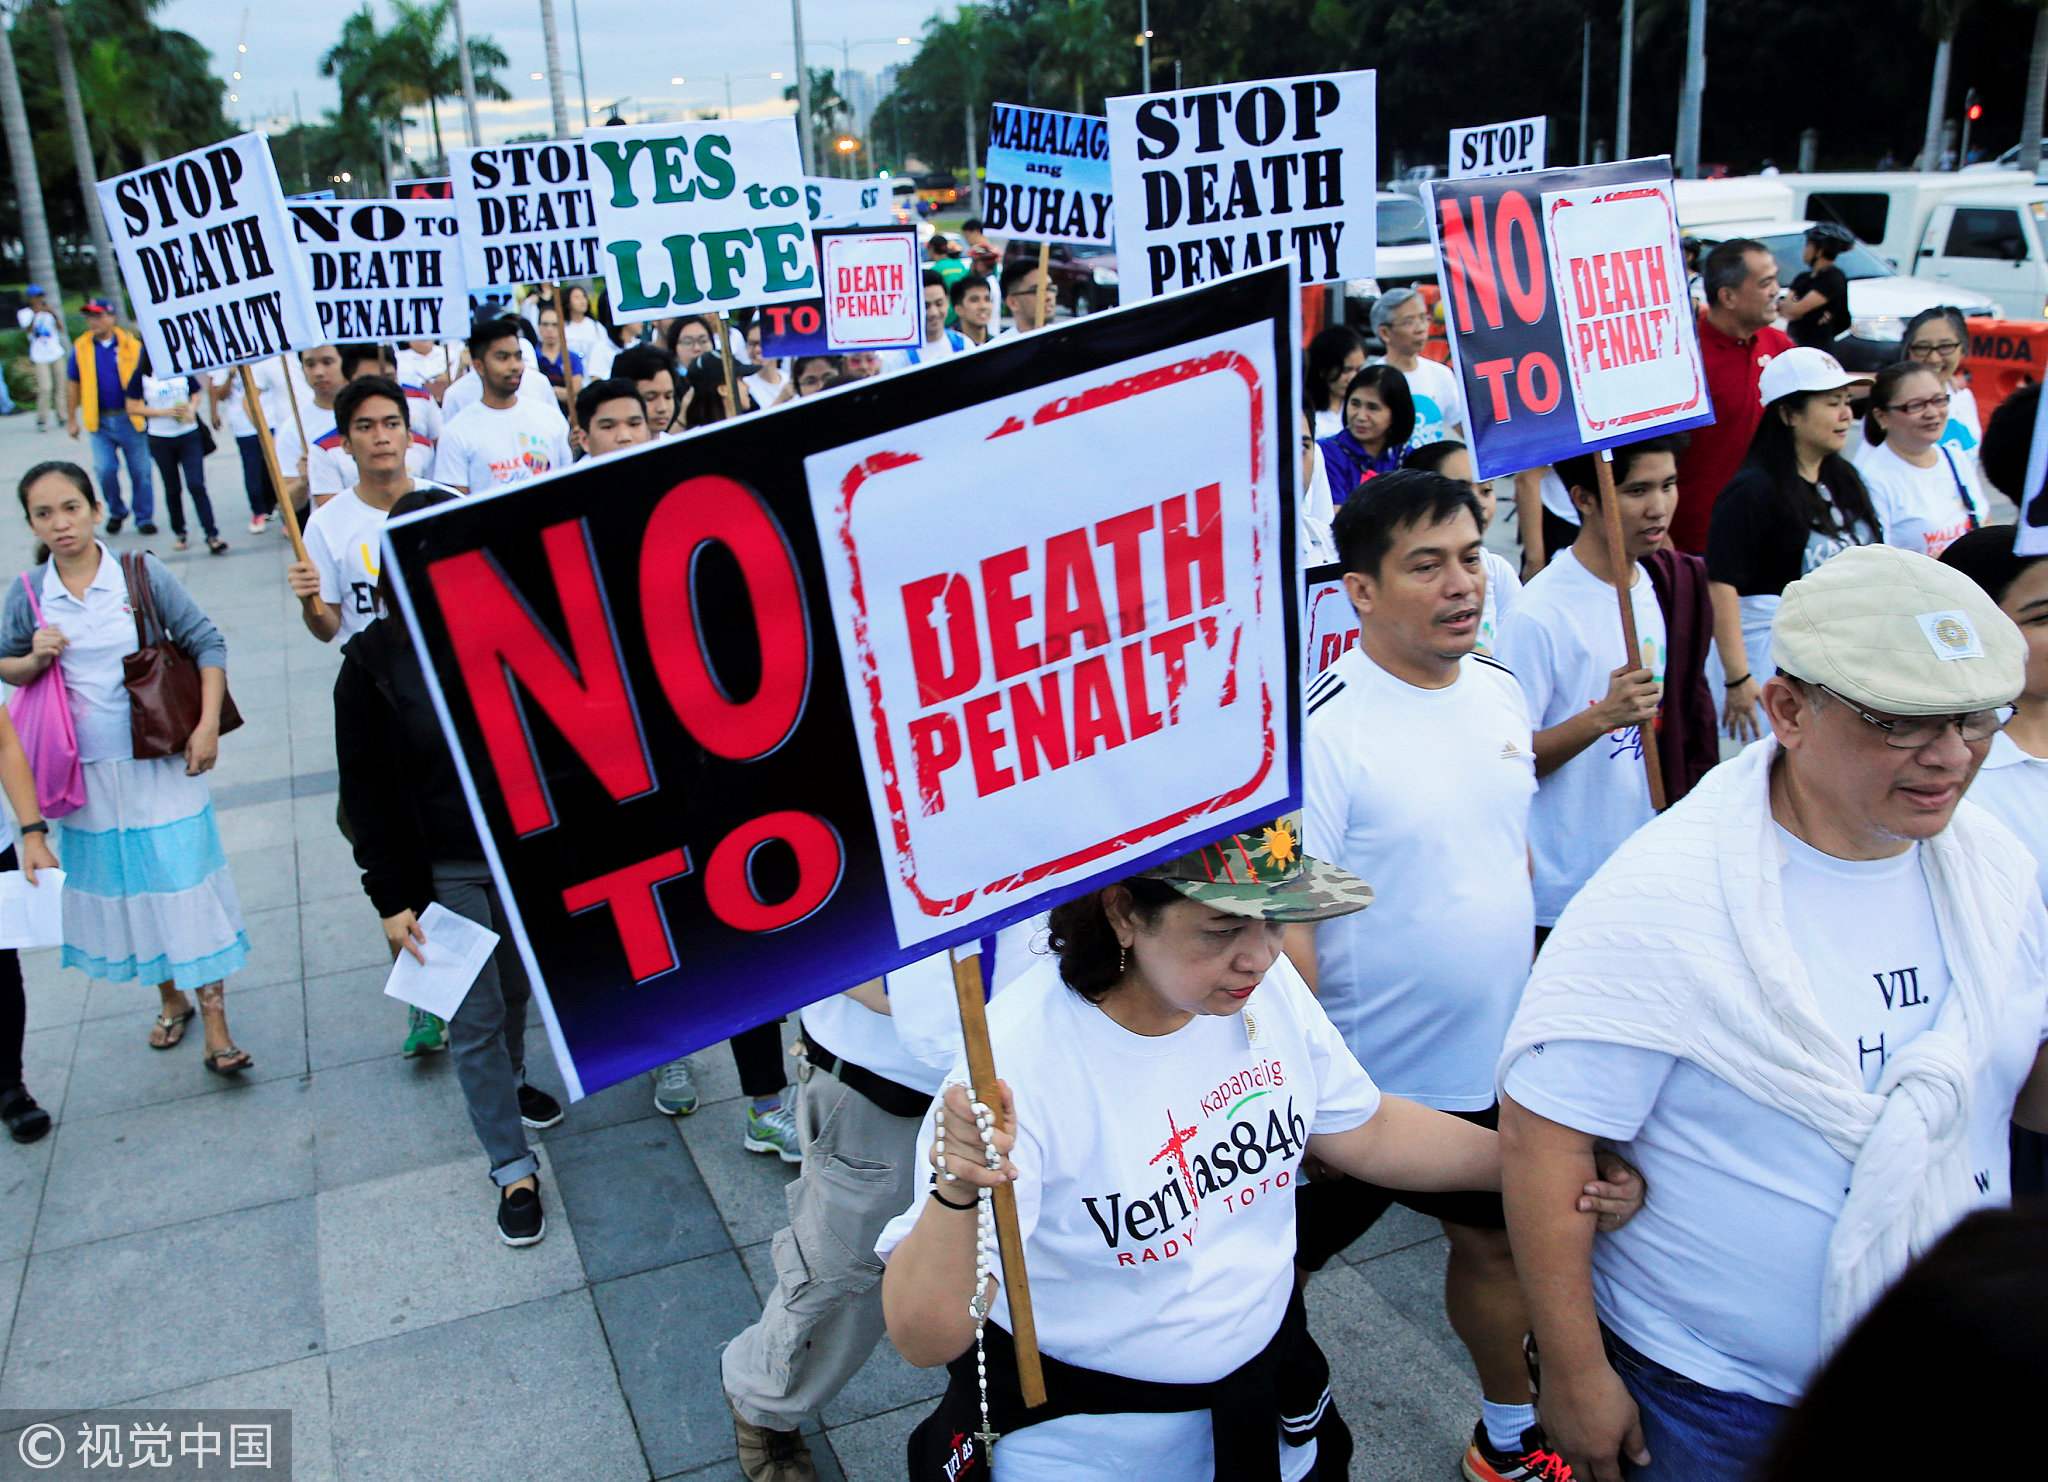 Article About Death Penalty In The Philippines